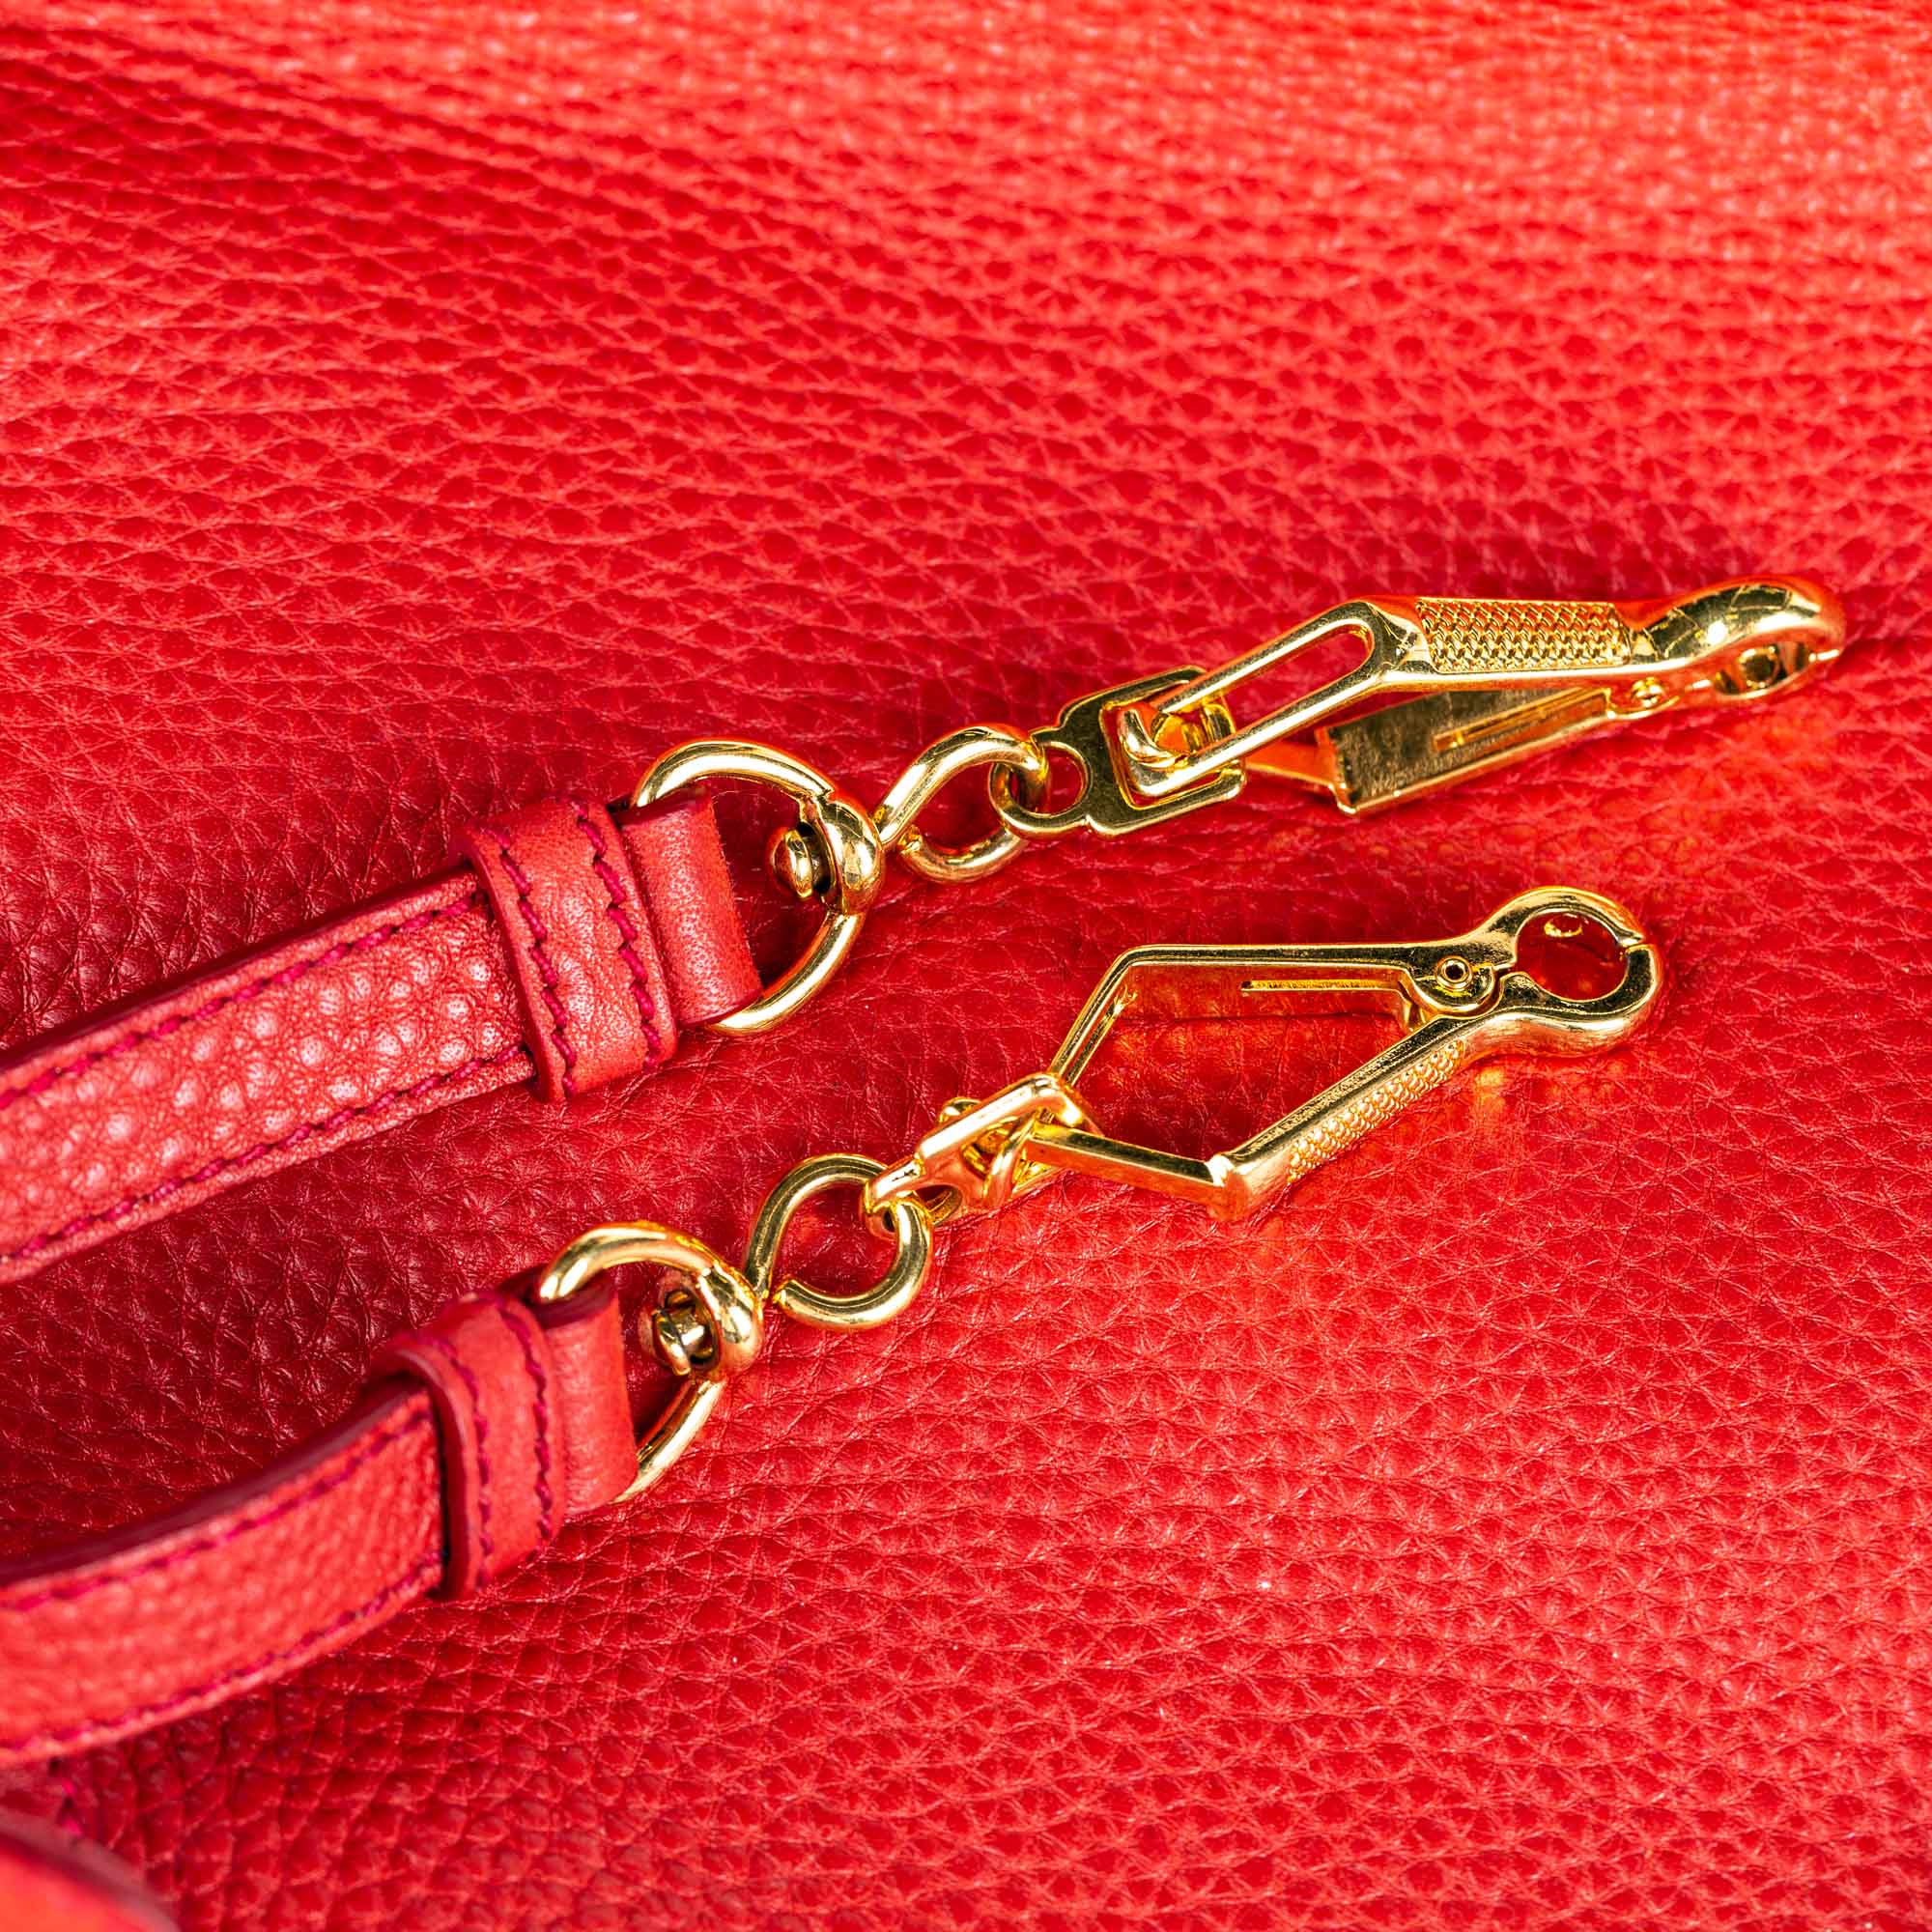 Miu Miu Vitello Daino Shopping Bag, this tote bag features a calf leather body, flat leather straps, - Image 17 of 19